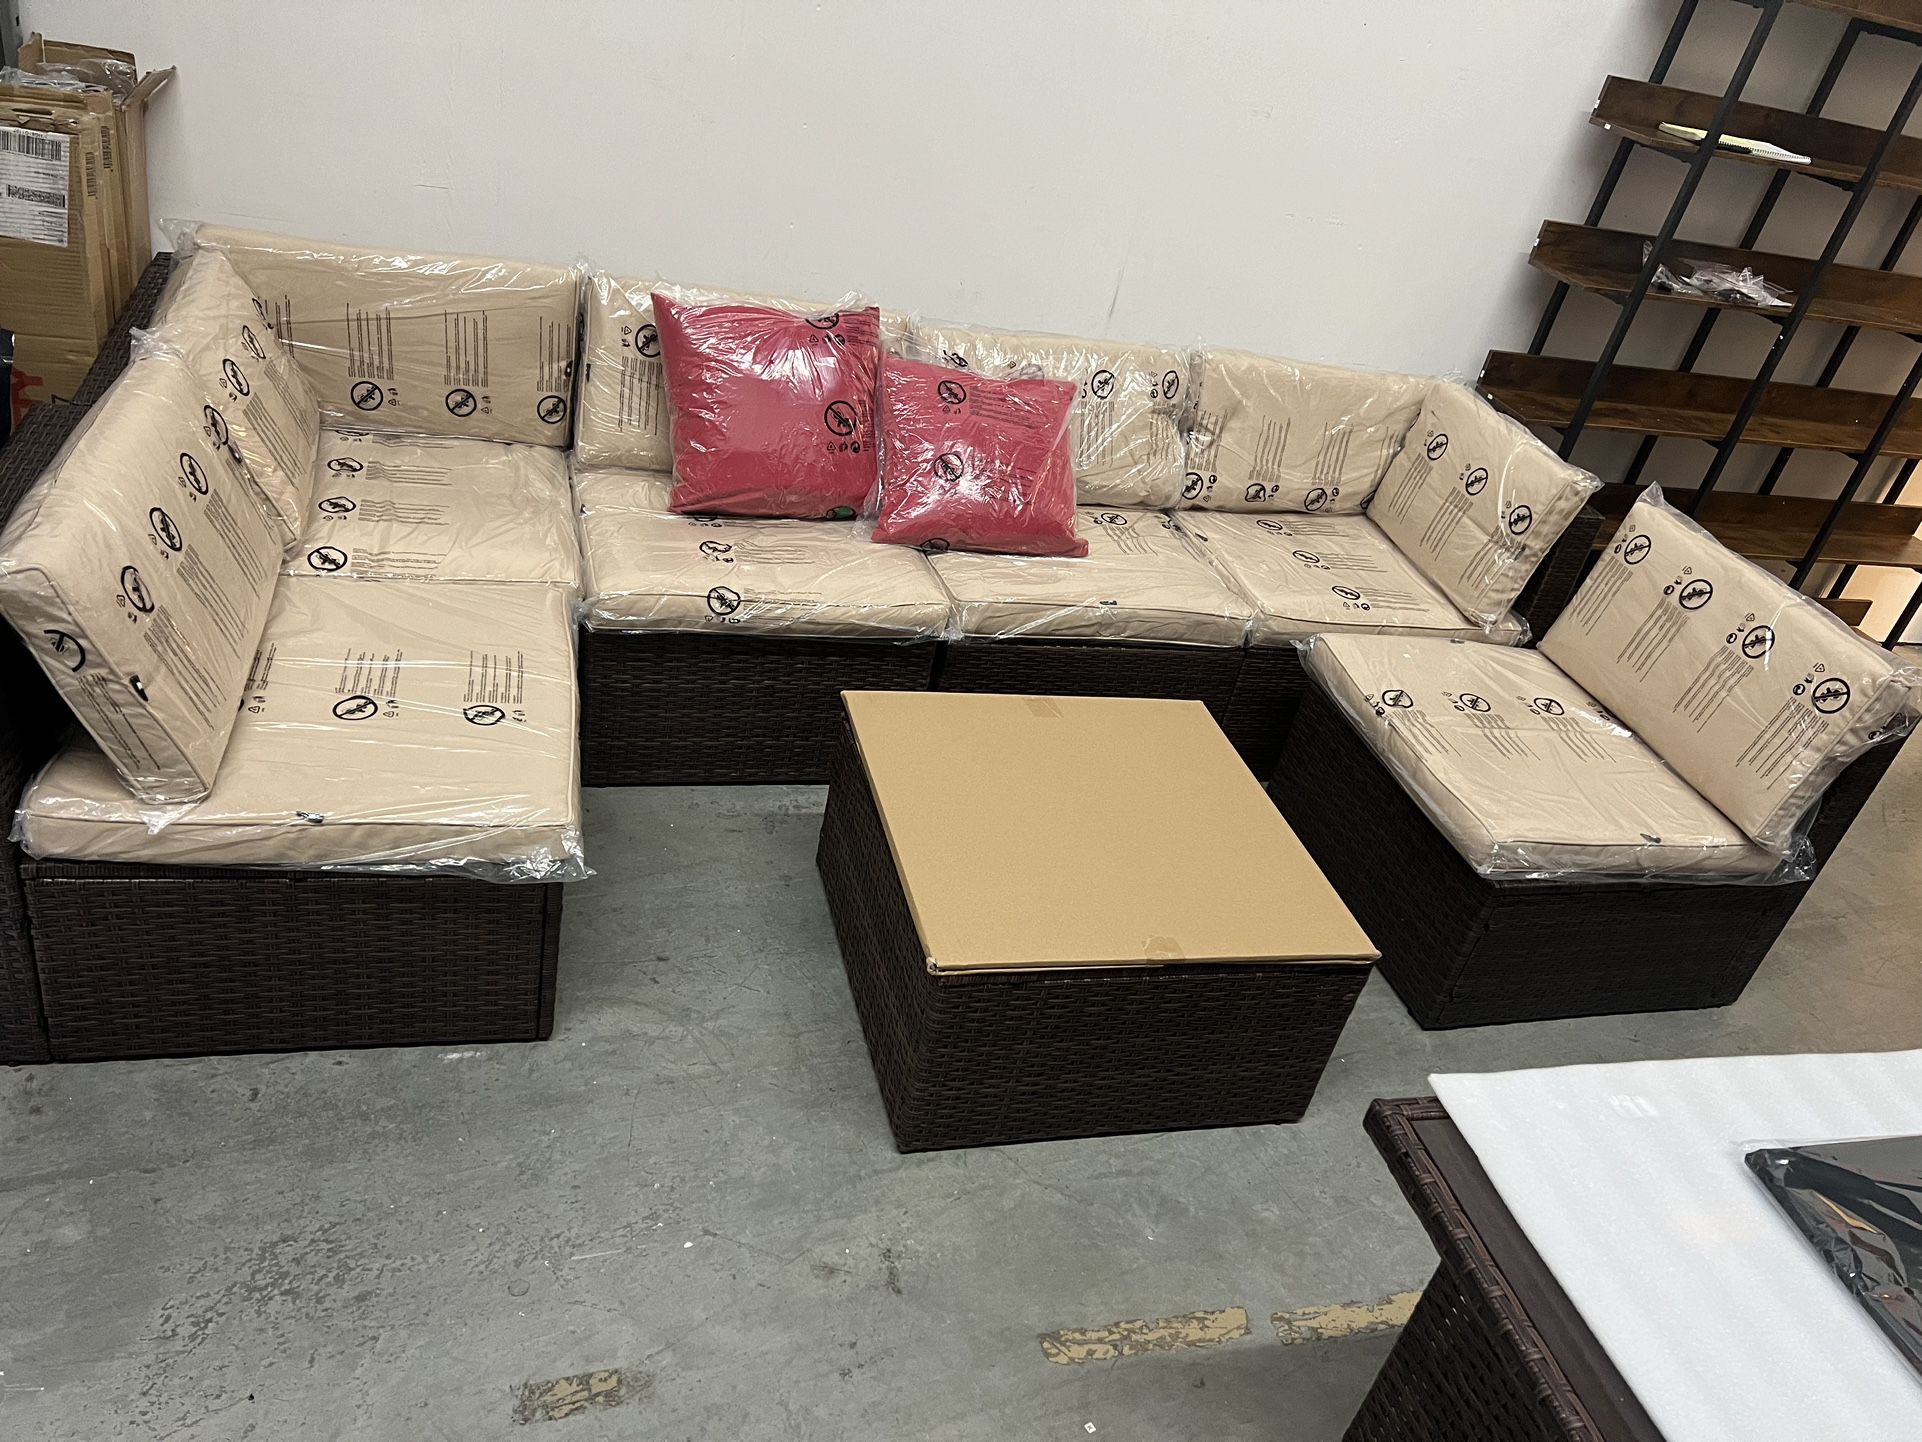 New, Patio Furniture Set 7 Pieces With Glass Coffee Table And Cushions (size In The Picture